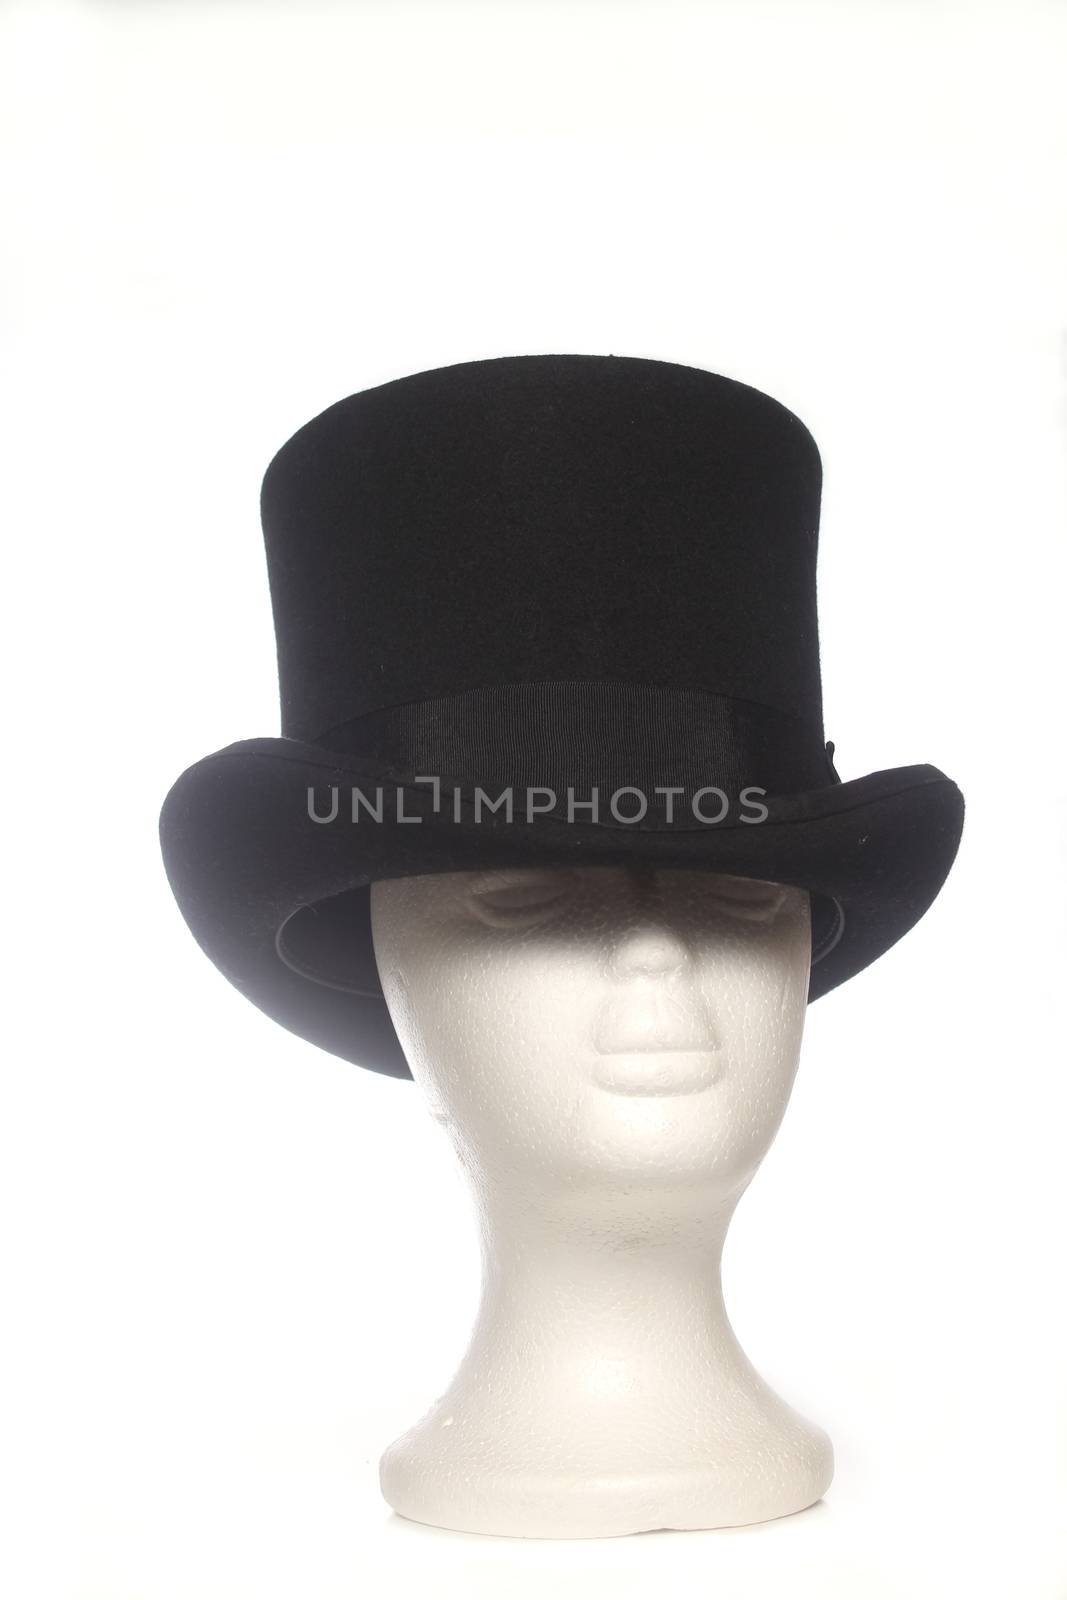 Vintage Top Hat on Mannequin Head by Marti157900